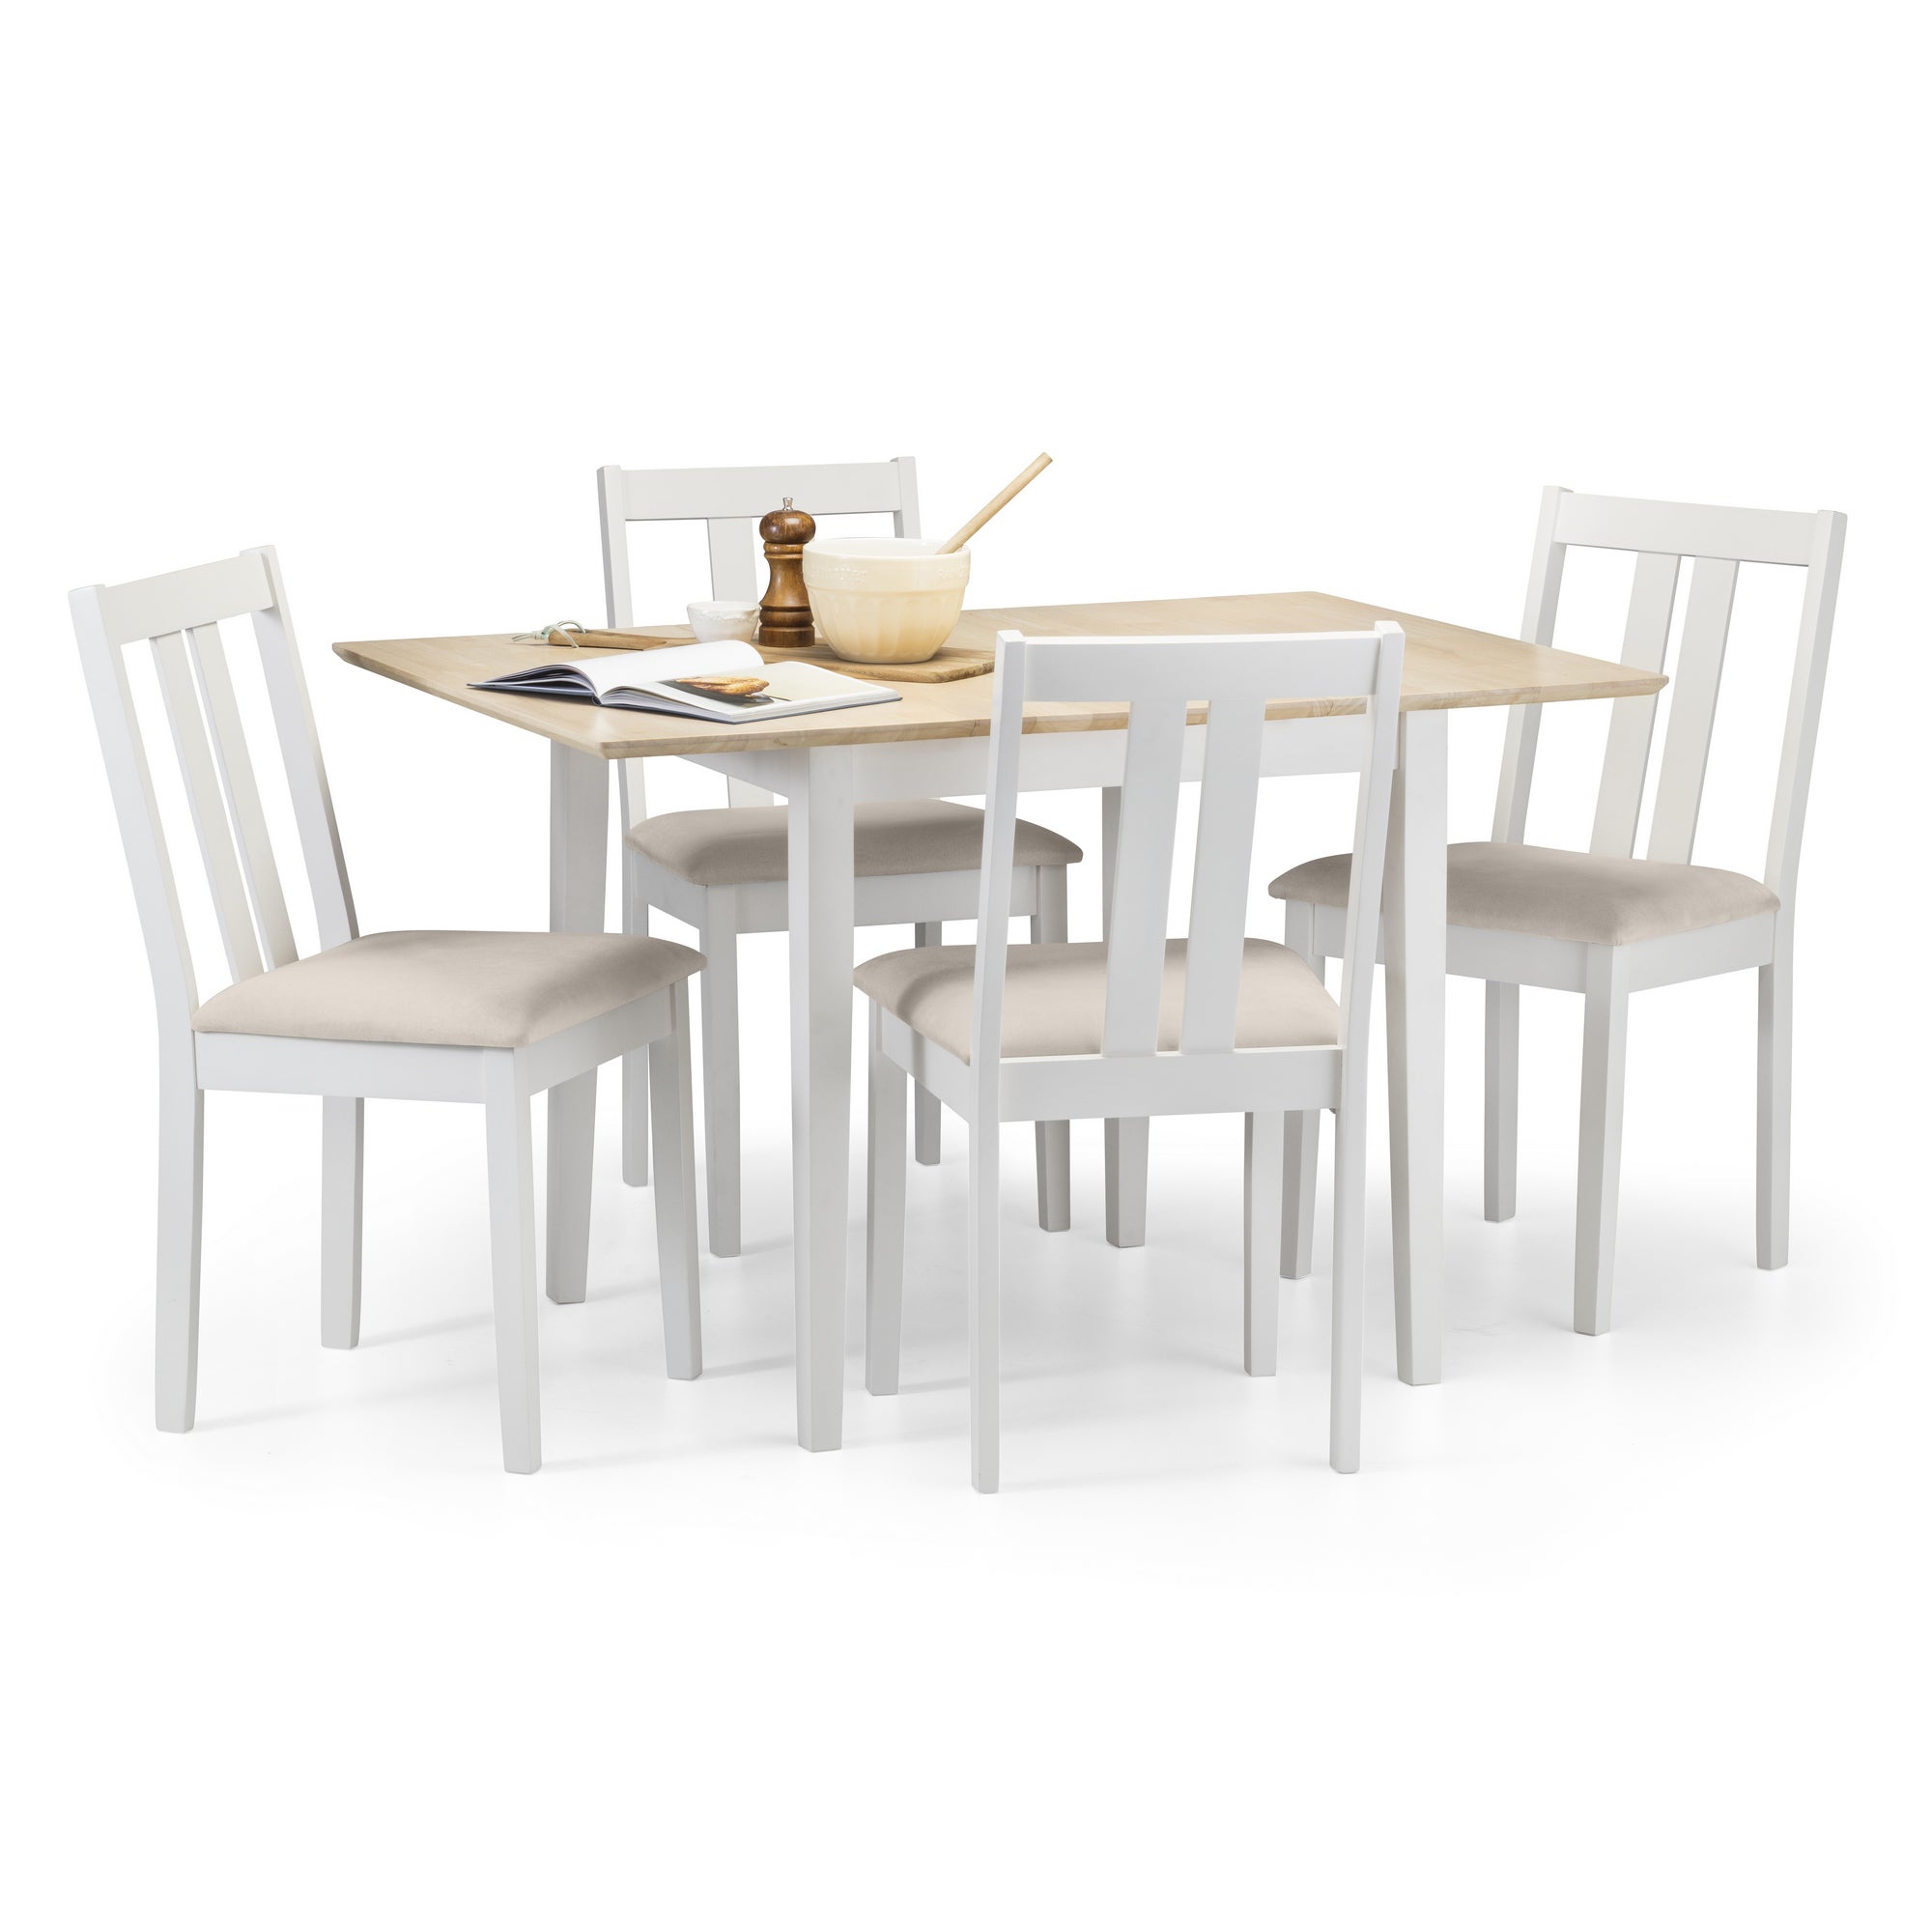 Rufford Two Tone Dining Table and 4 Ivory Chairs Cream